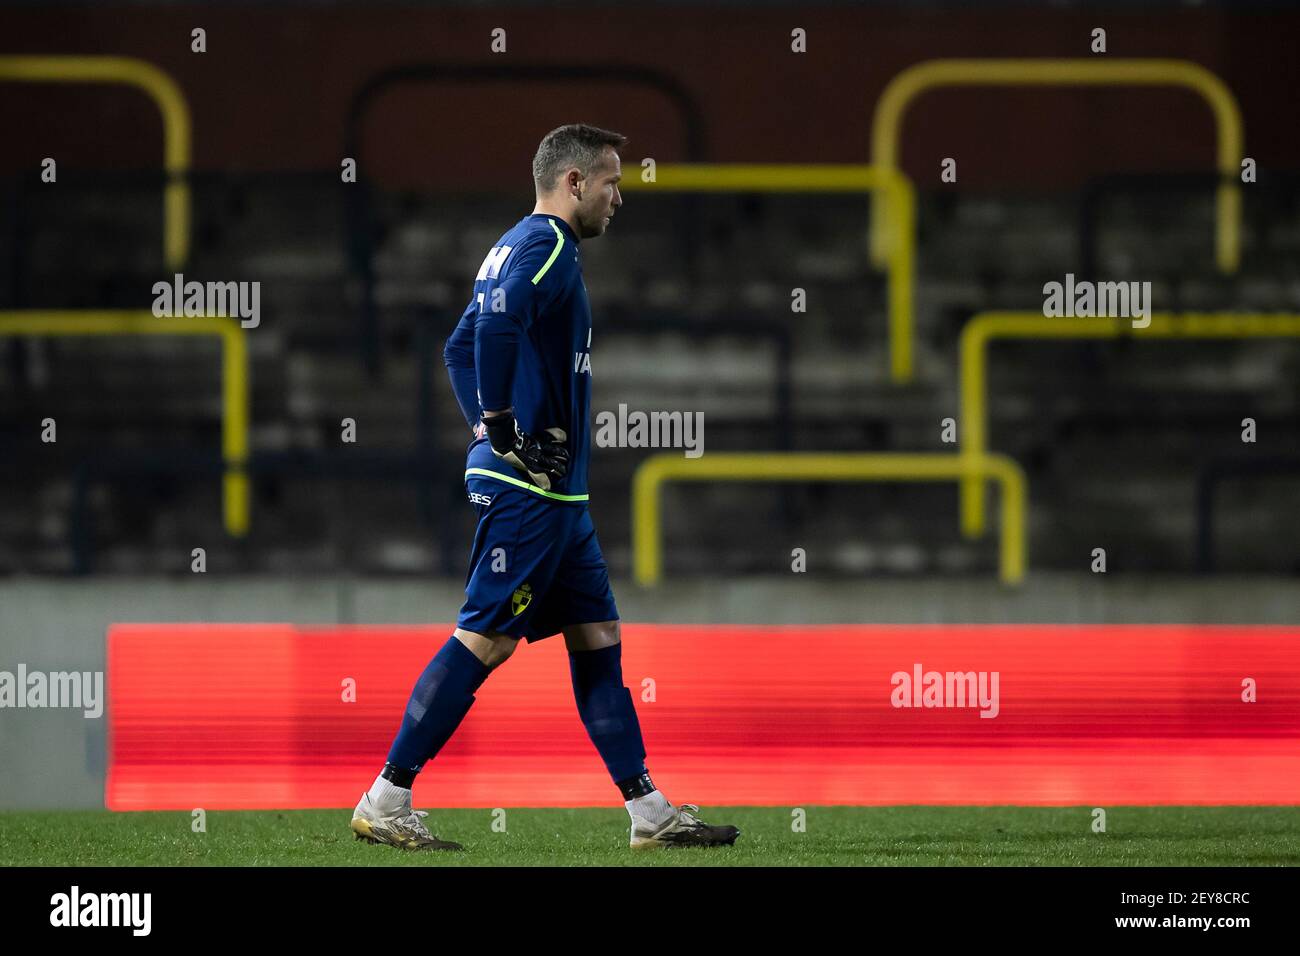 Lierse's goalkeeper Bernd Brughmans pictured after a soccer match between Lierse Kempenzonen and Union Saint-Gilloise, Friday 05 March 2021 in Lier, o Stock Photo